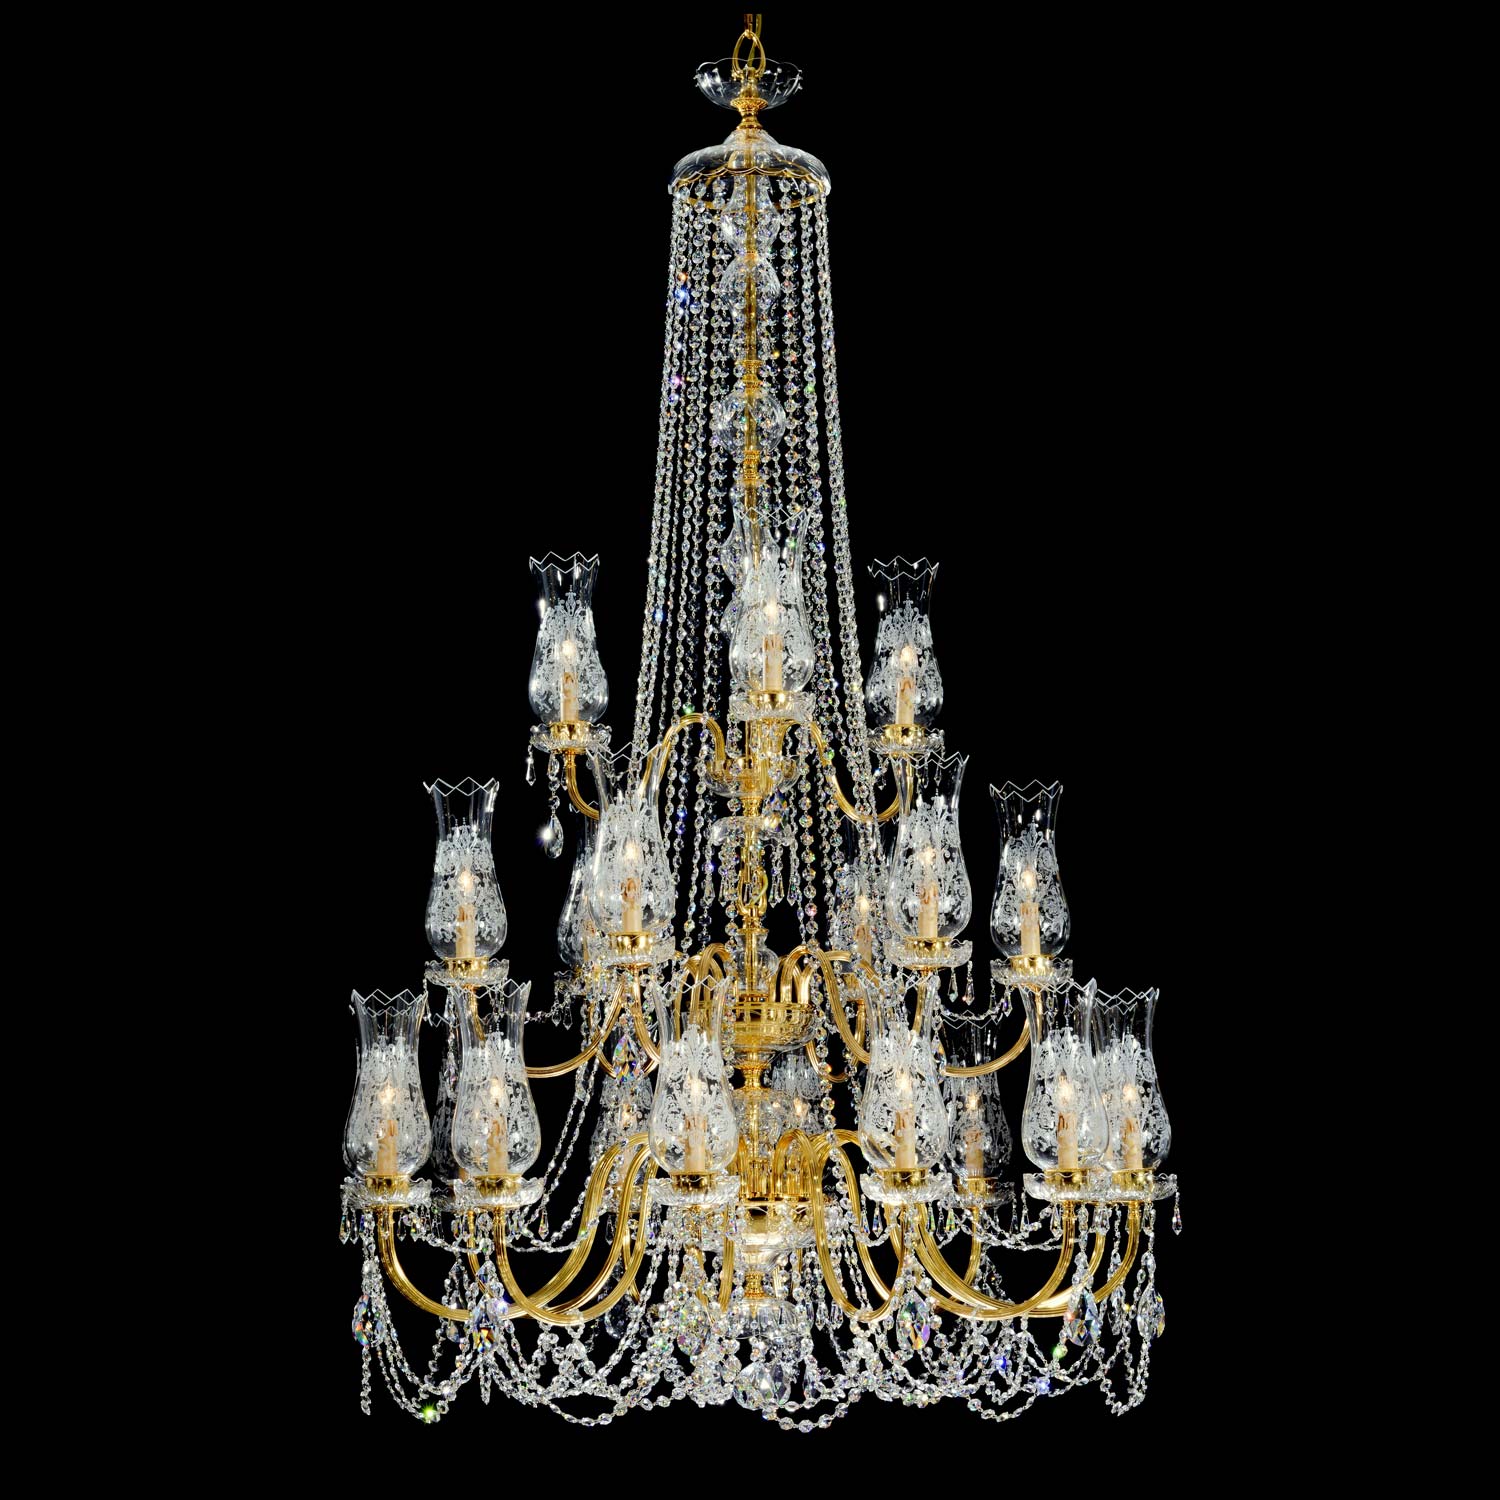 Chandelier - 22401/12<img data-tf-not-load src="https://www.gmoscatelli.it/wp-content/uploads/2019/07/plus.png">6<img data-tf-not-load src="https://www.gmoscatelli.it/wp-content/uploads/2019/07/plus.png">3 - h. cm 200 - Ø cm 120